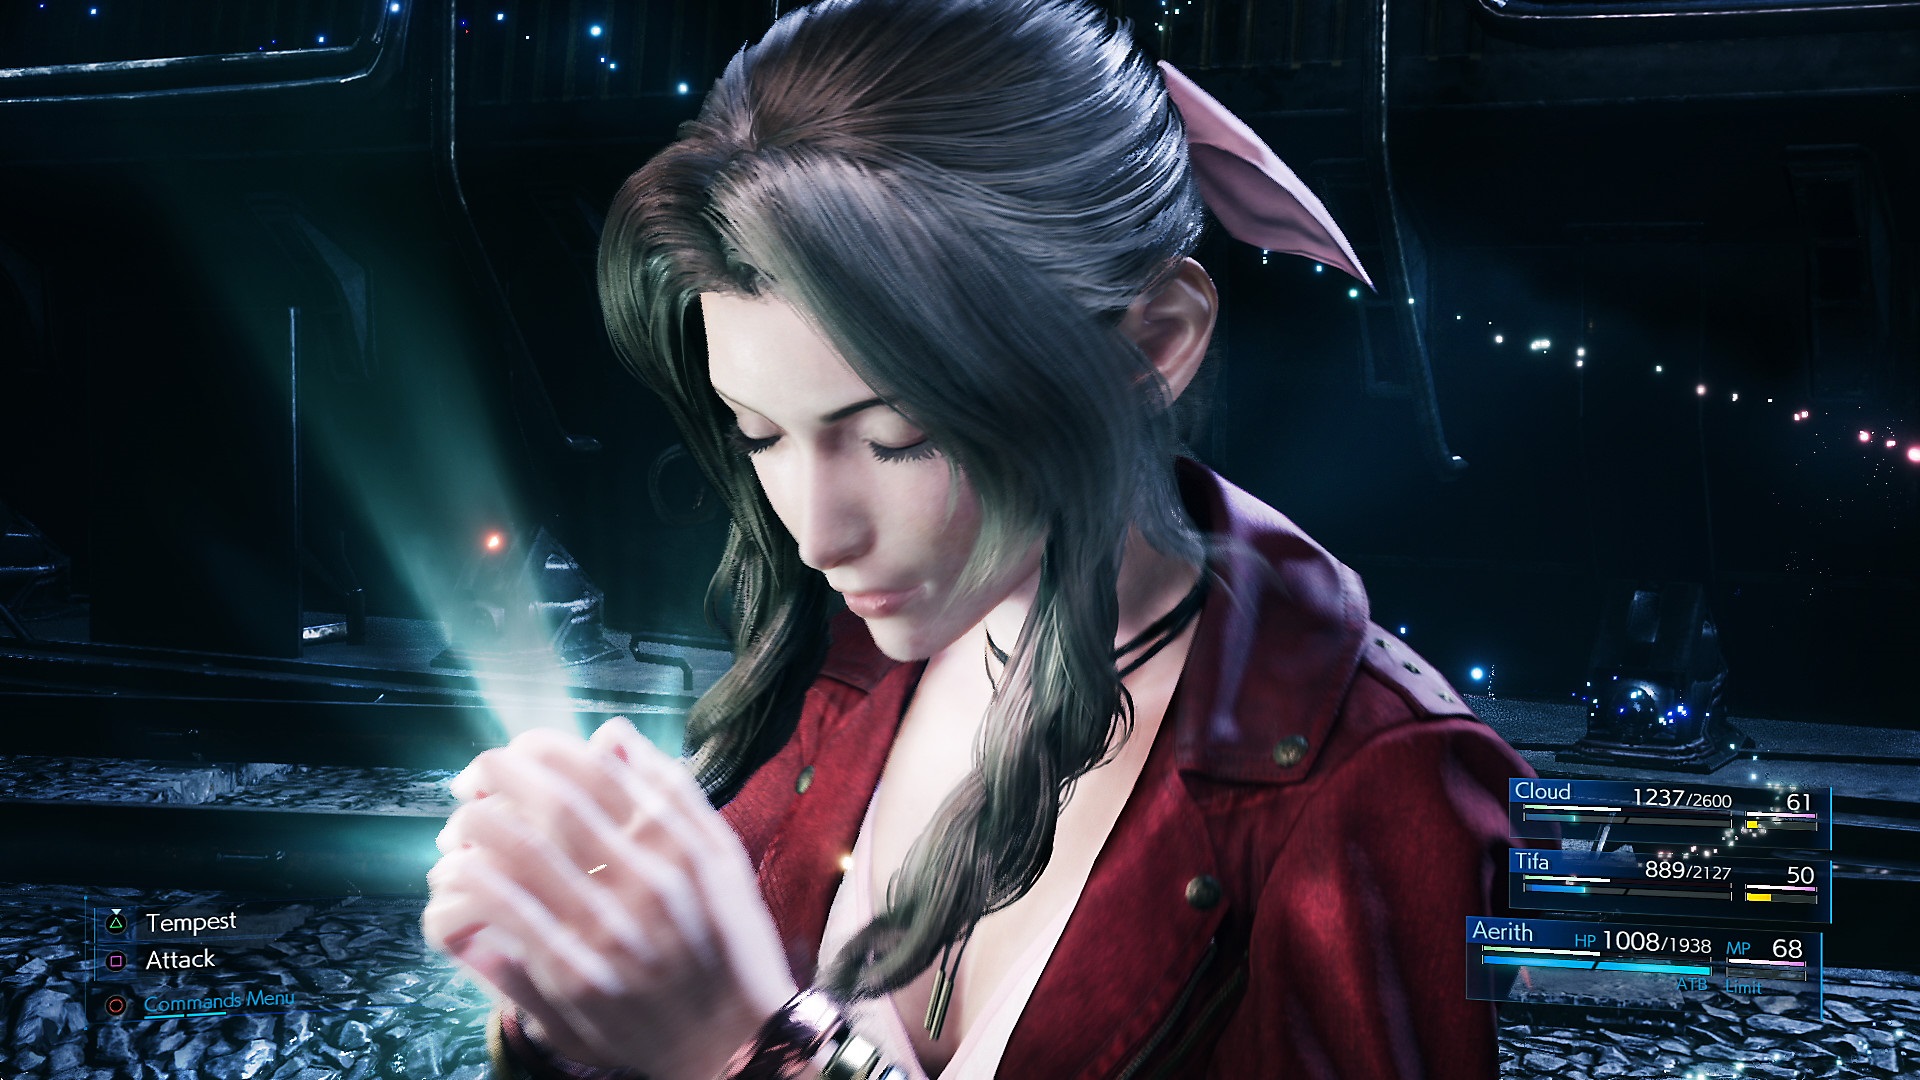 Apparent Final  Fantasy  7  Remake PC  Data Found in Datamined 